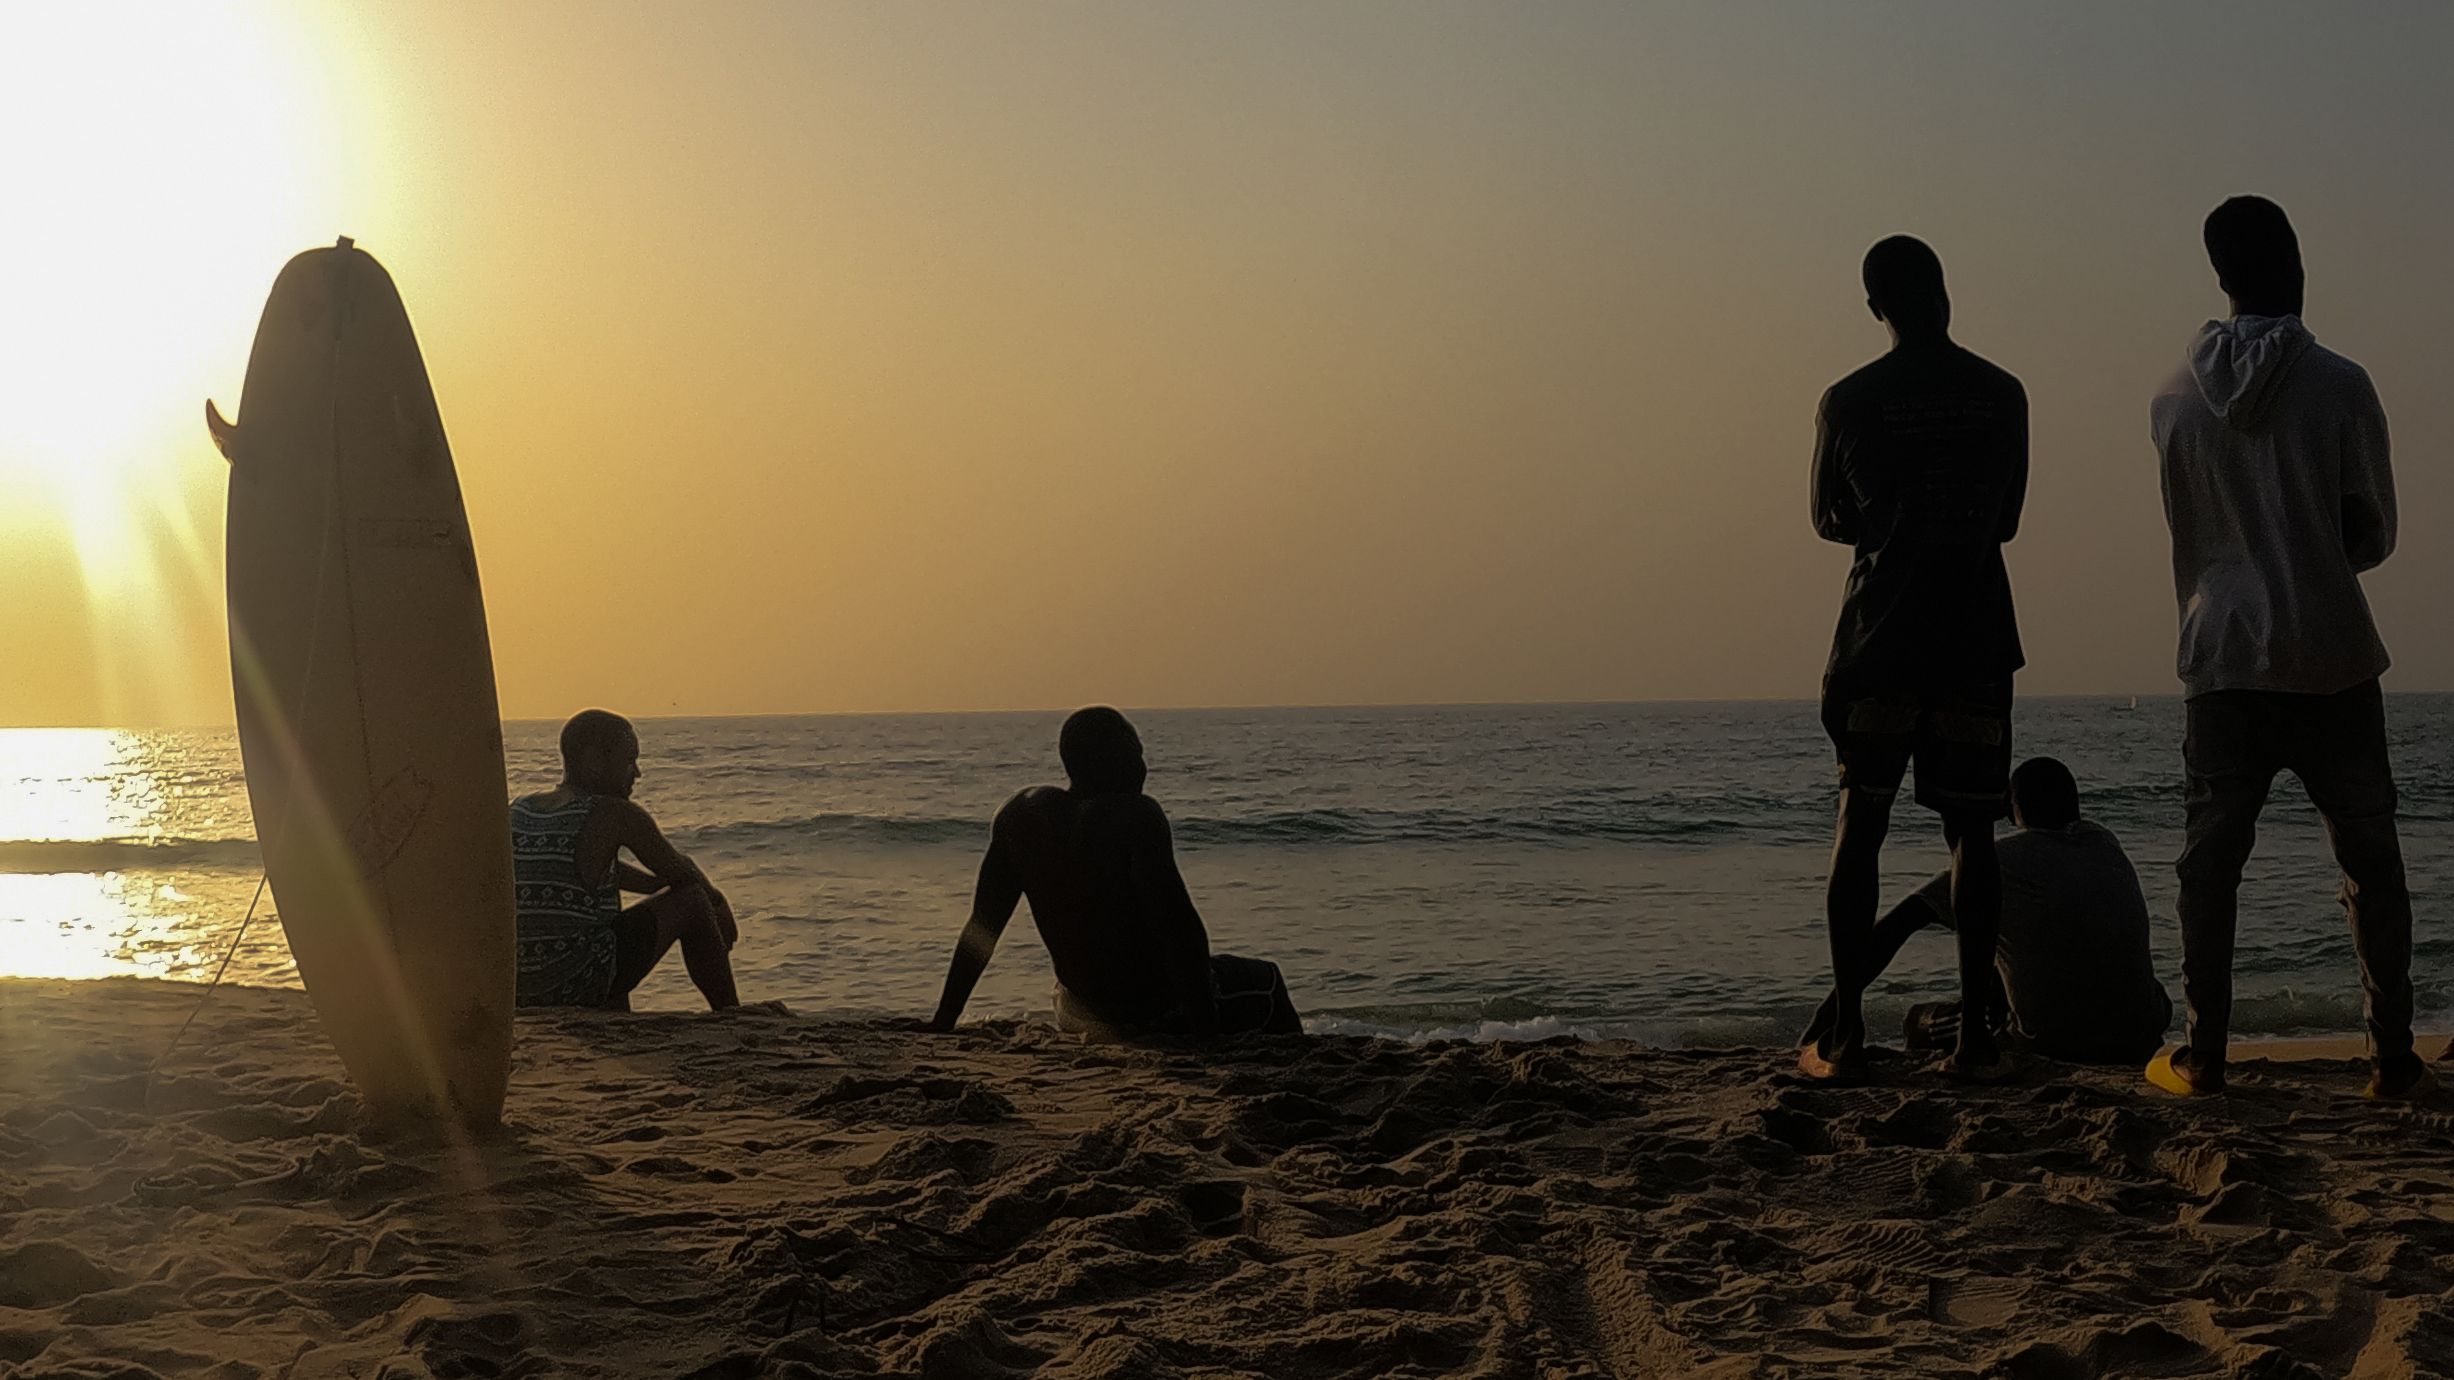 Liberia's surf culture has come to the attention of Liberian American filmmaker Artina Michelle, who has spent the last four years making the documentary "This Too Is Liberia." It follows the journey of Robertsport's surfers and Liberians' relationship with the ocean.